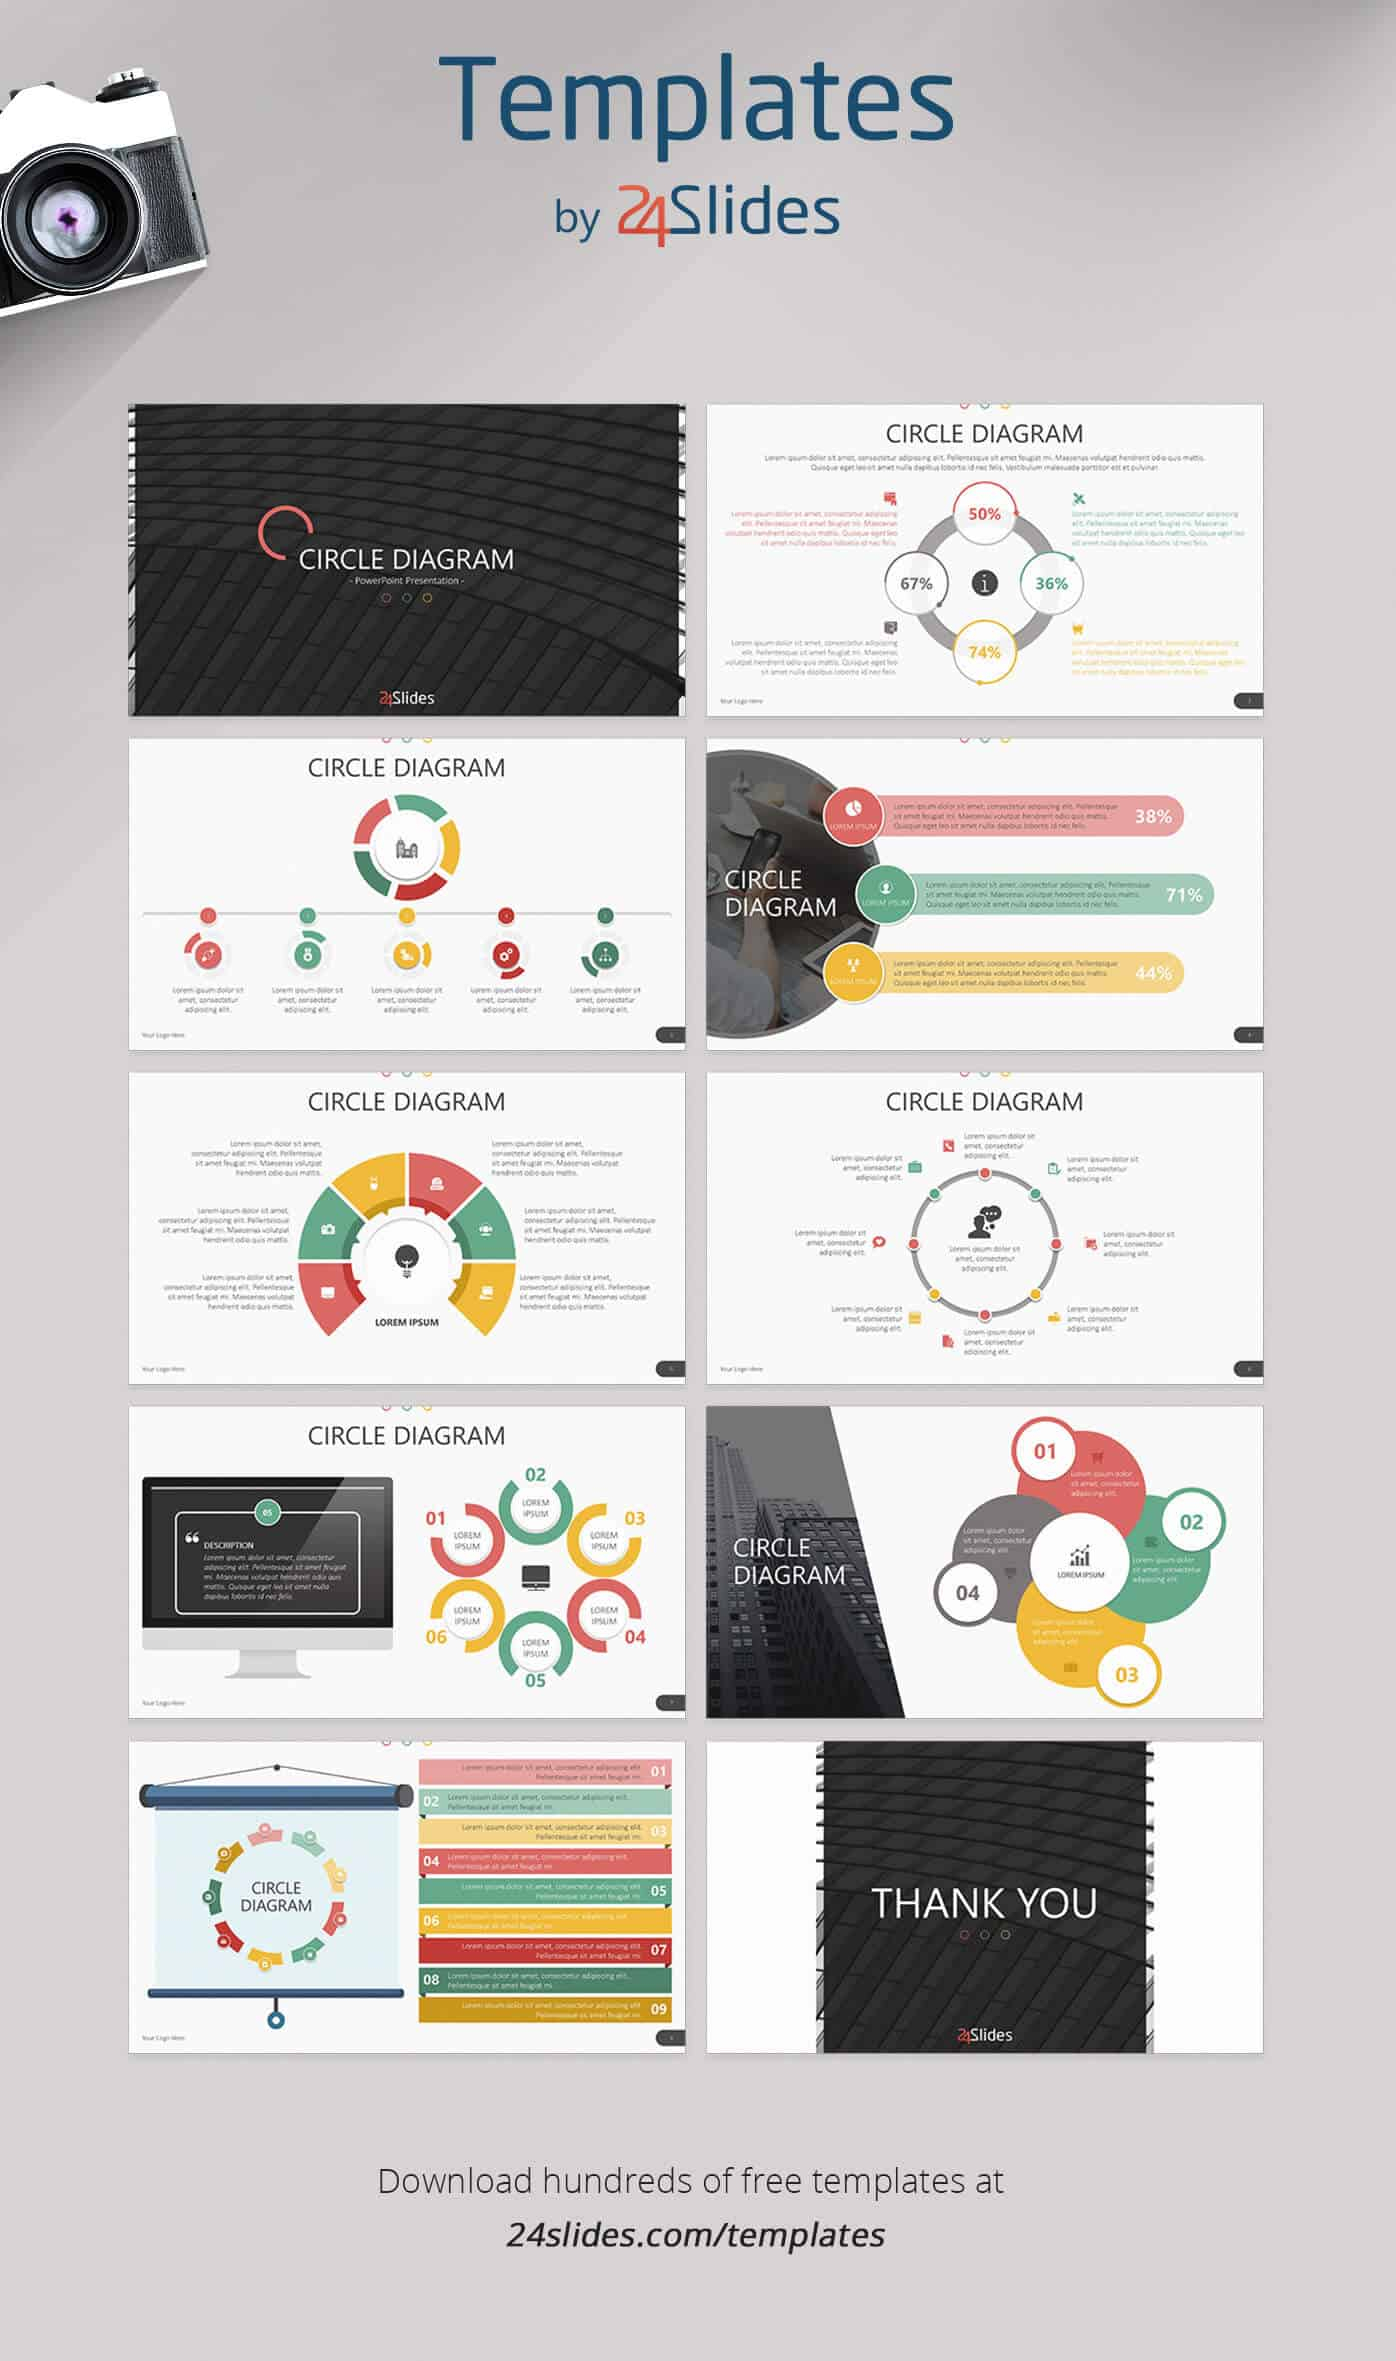 15 Fun And Colorful Free Powerpoint Templates | Present Better Regarding Powerpoint Slides Design Templates For Free